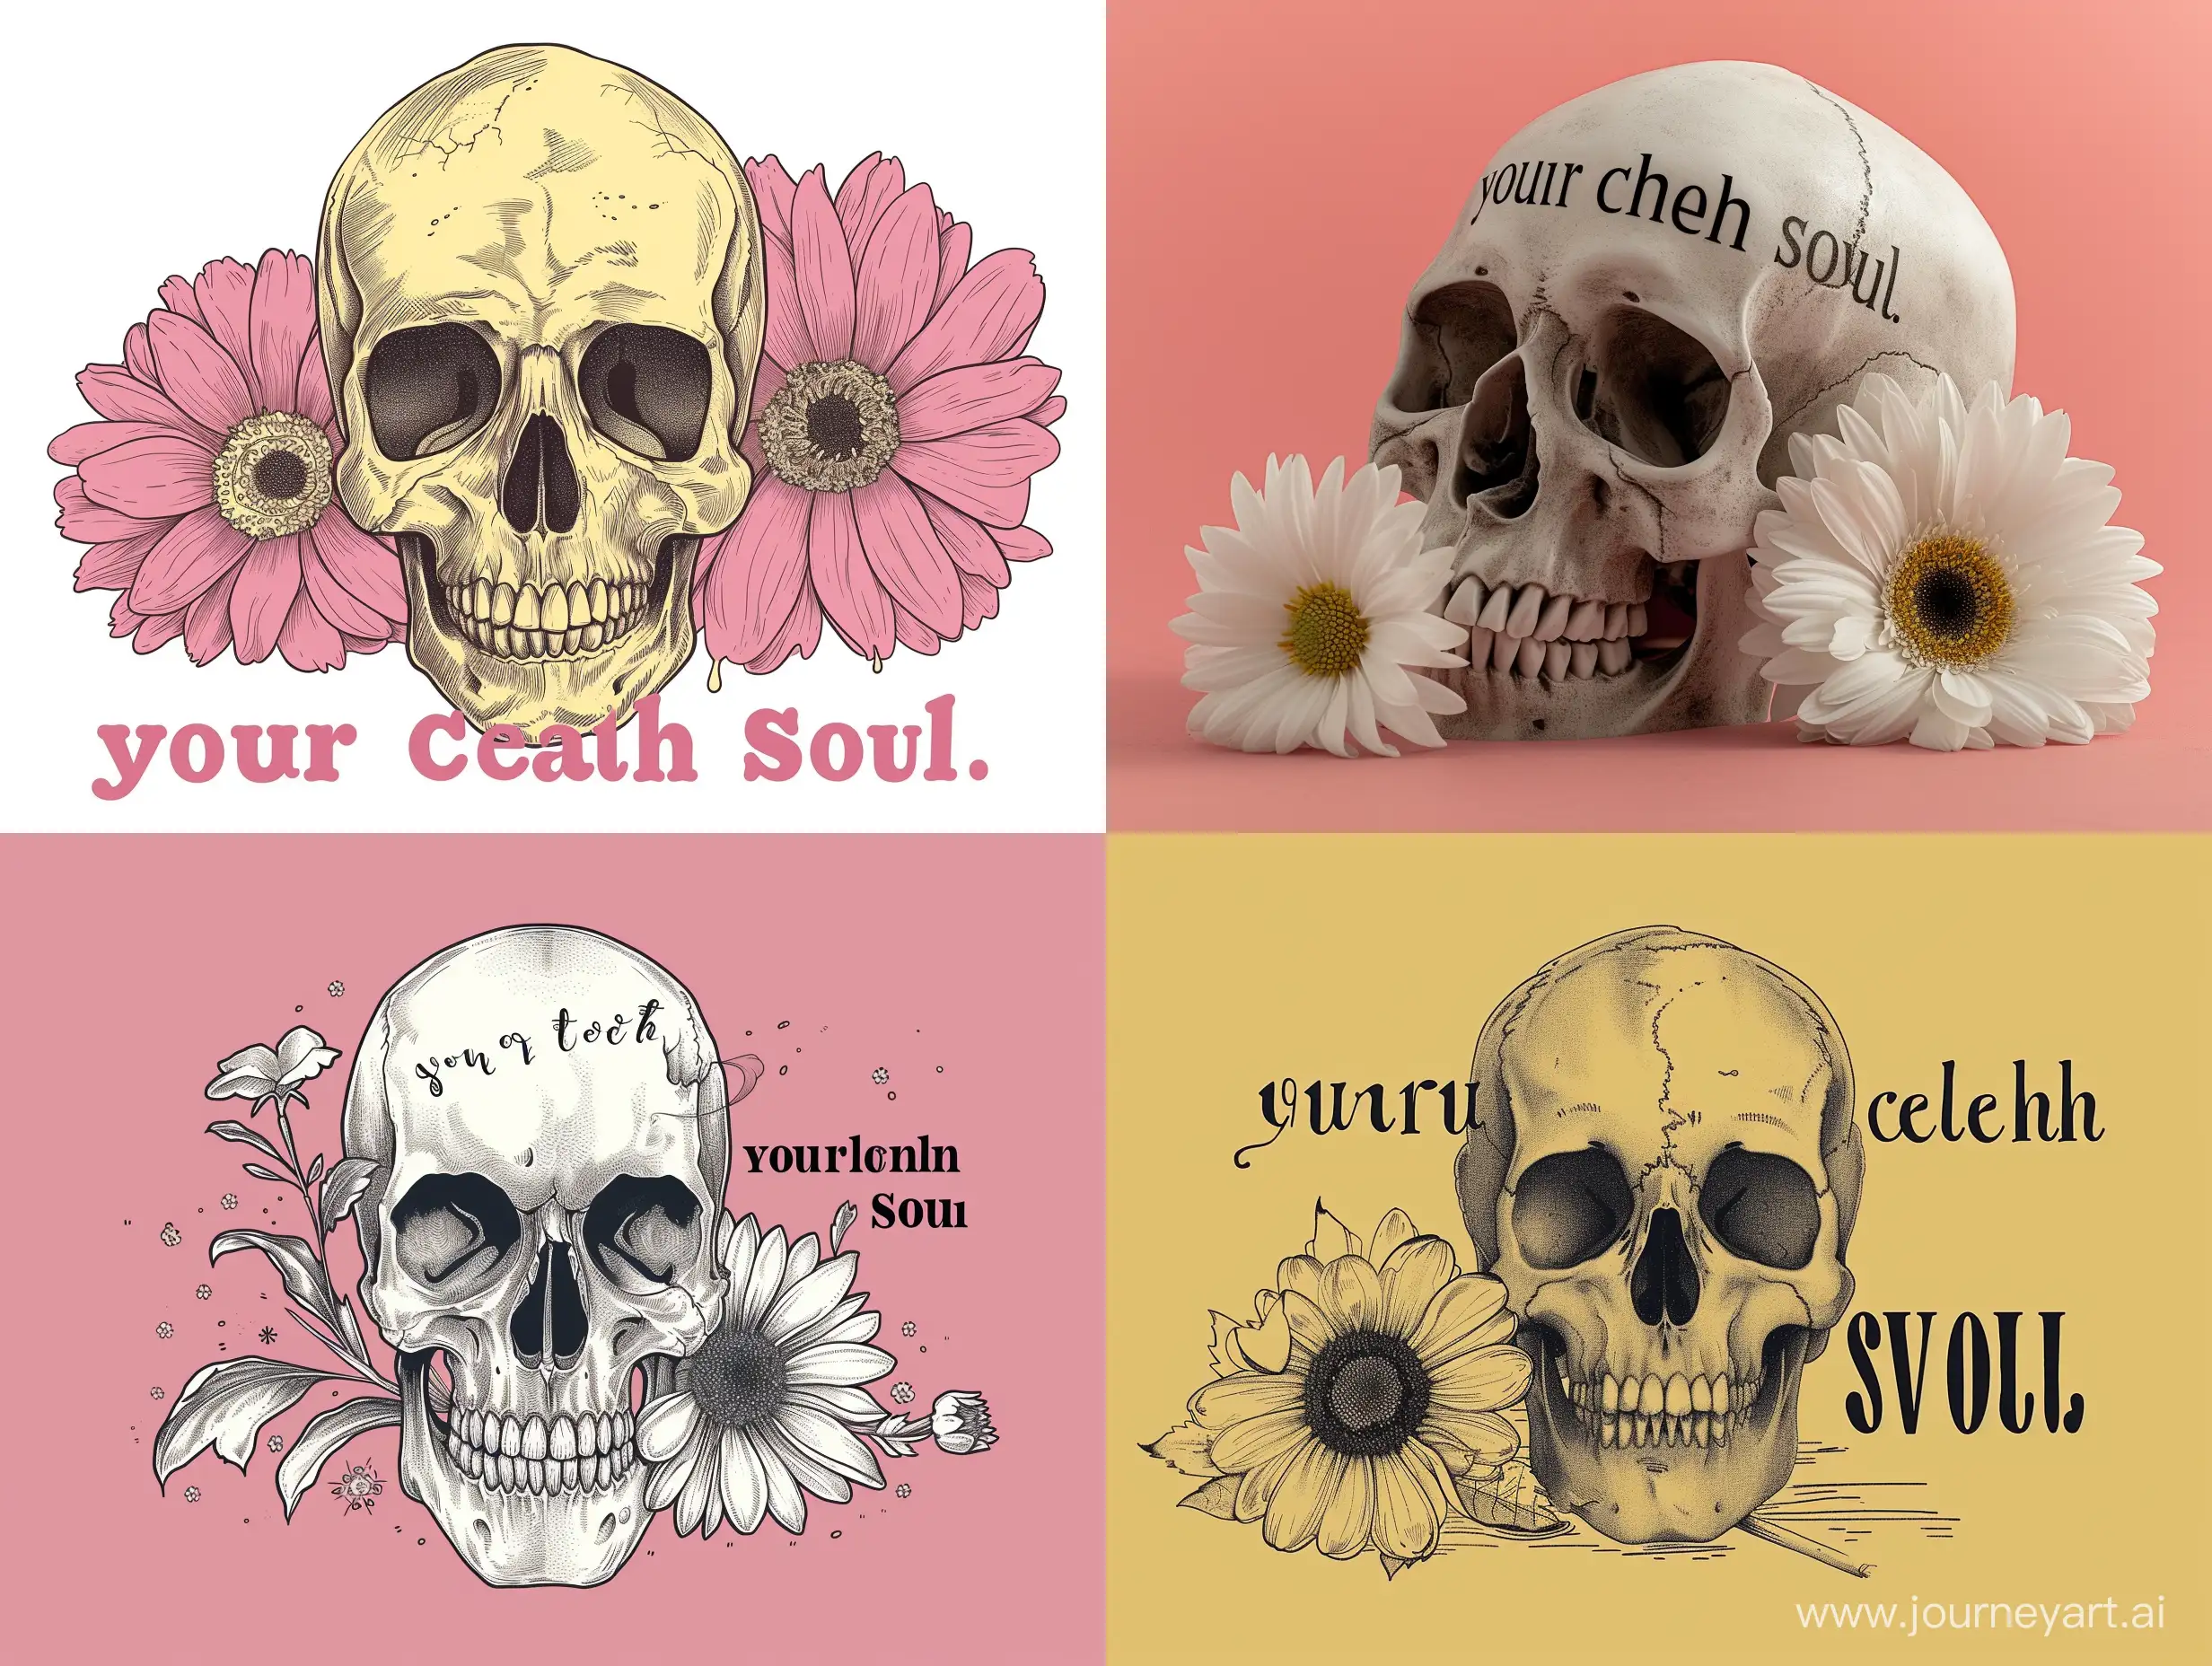 Artistic-Fusion-Blossoming-Soul-in-a-Giant-Skull